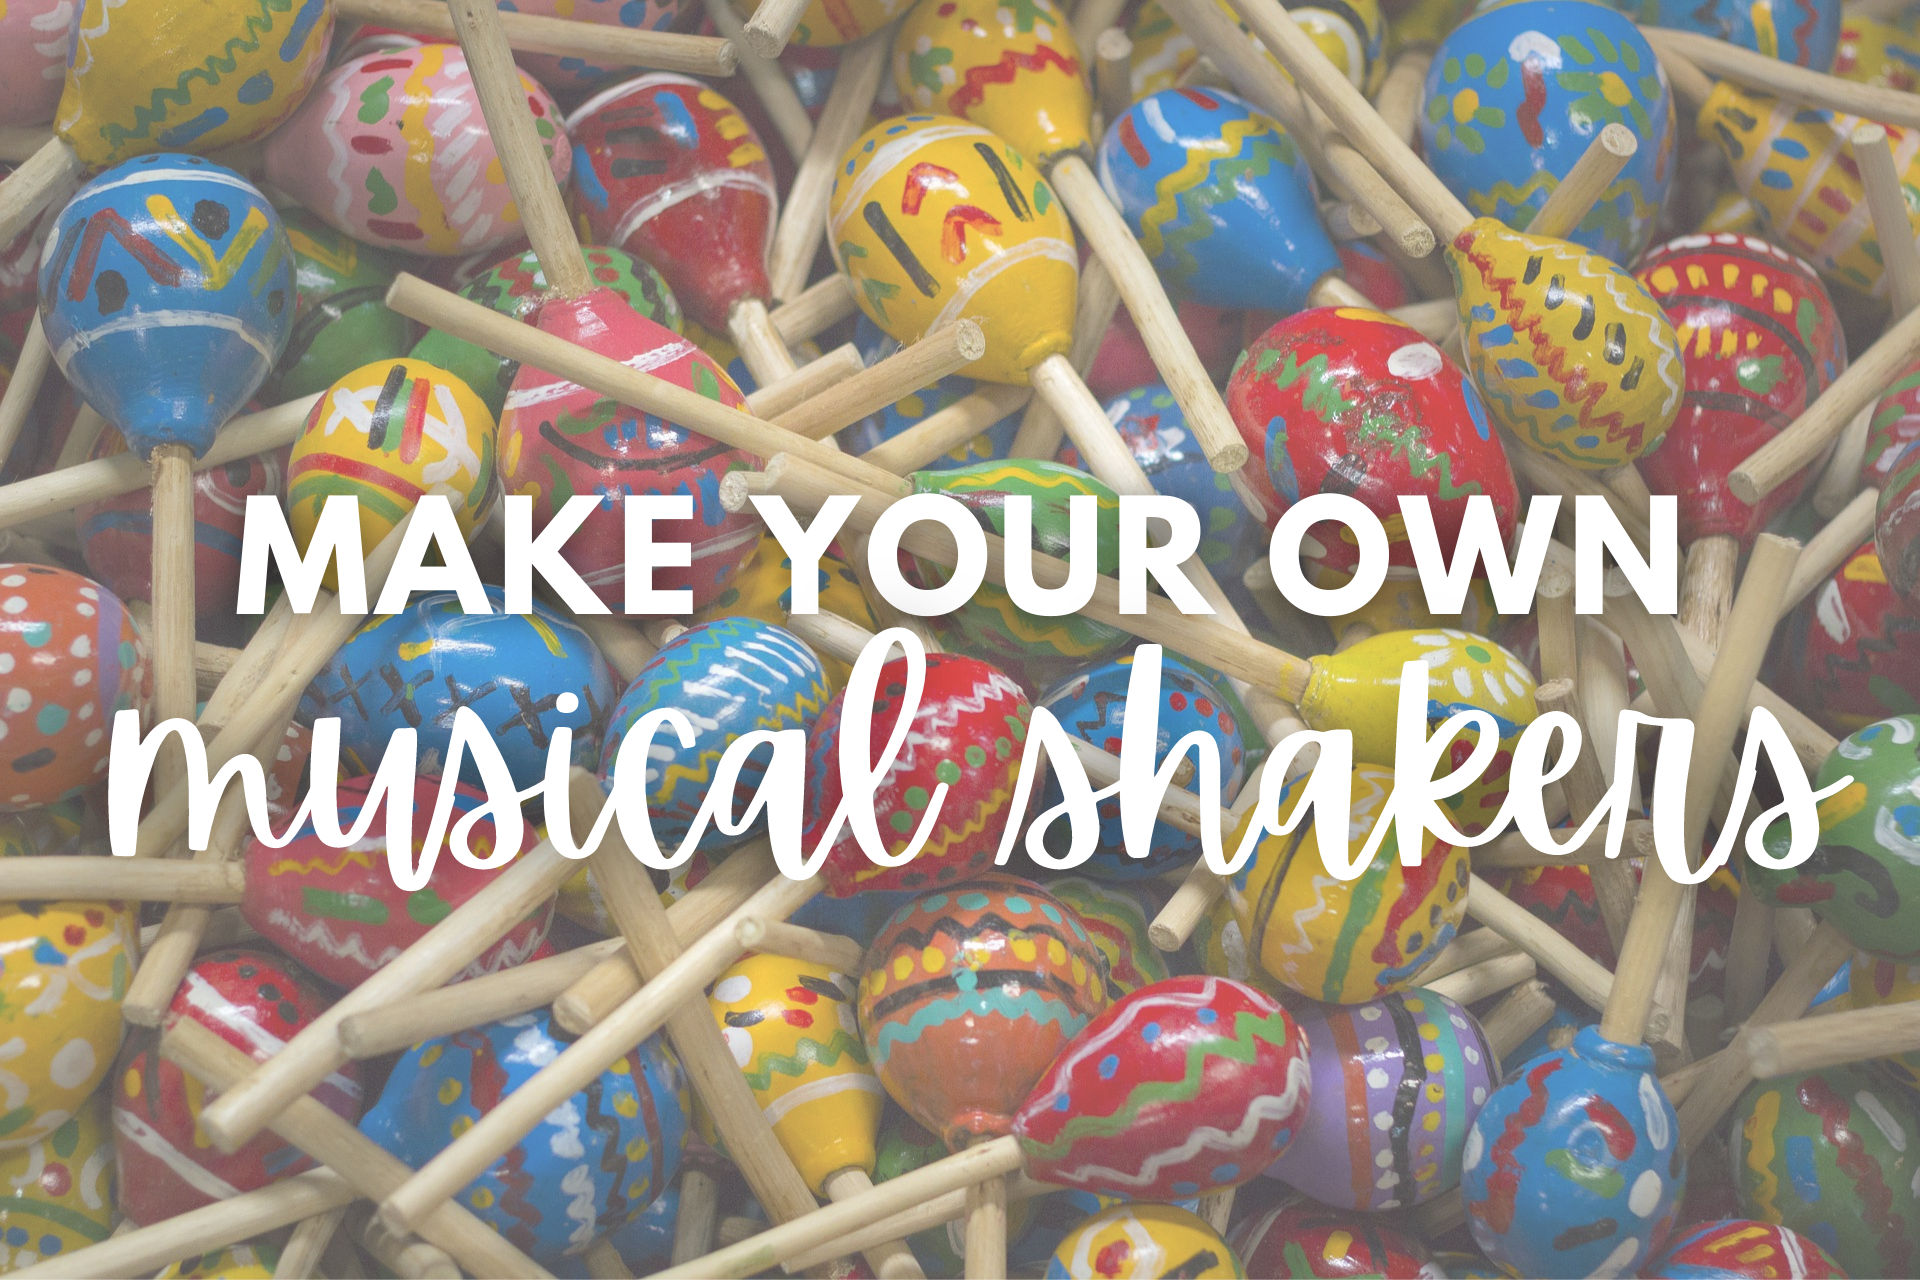 Make Your Own Musical Shakers